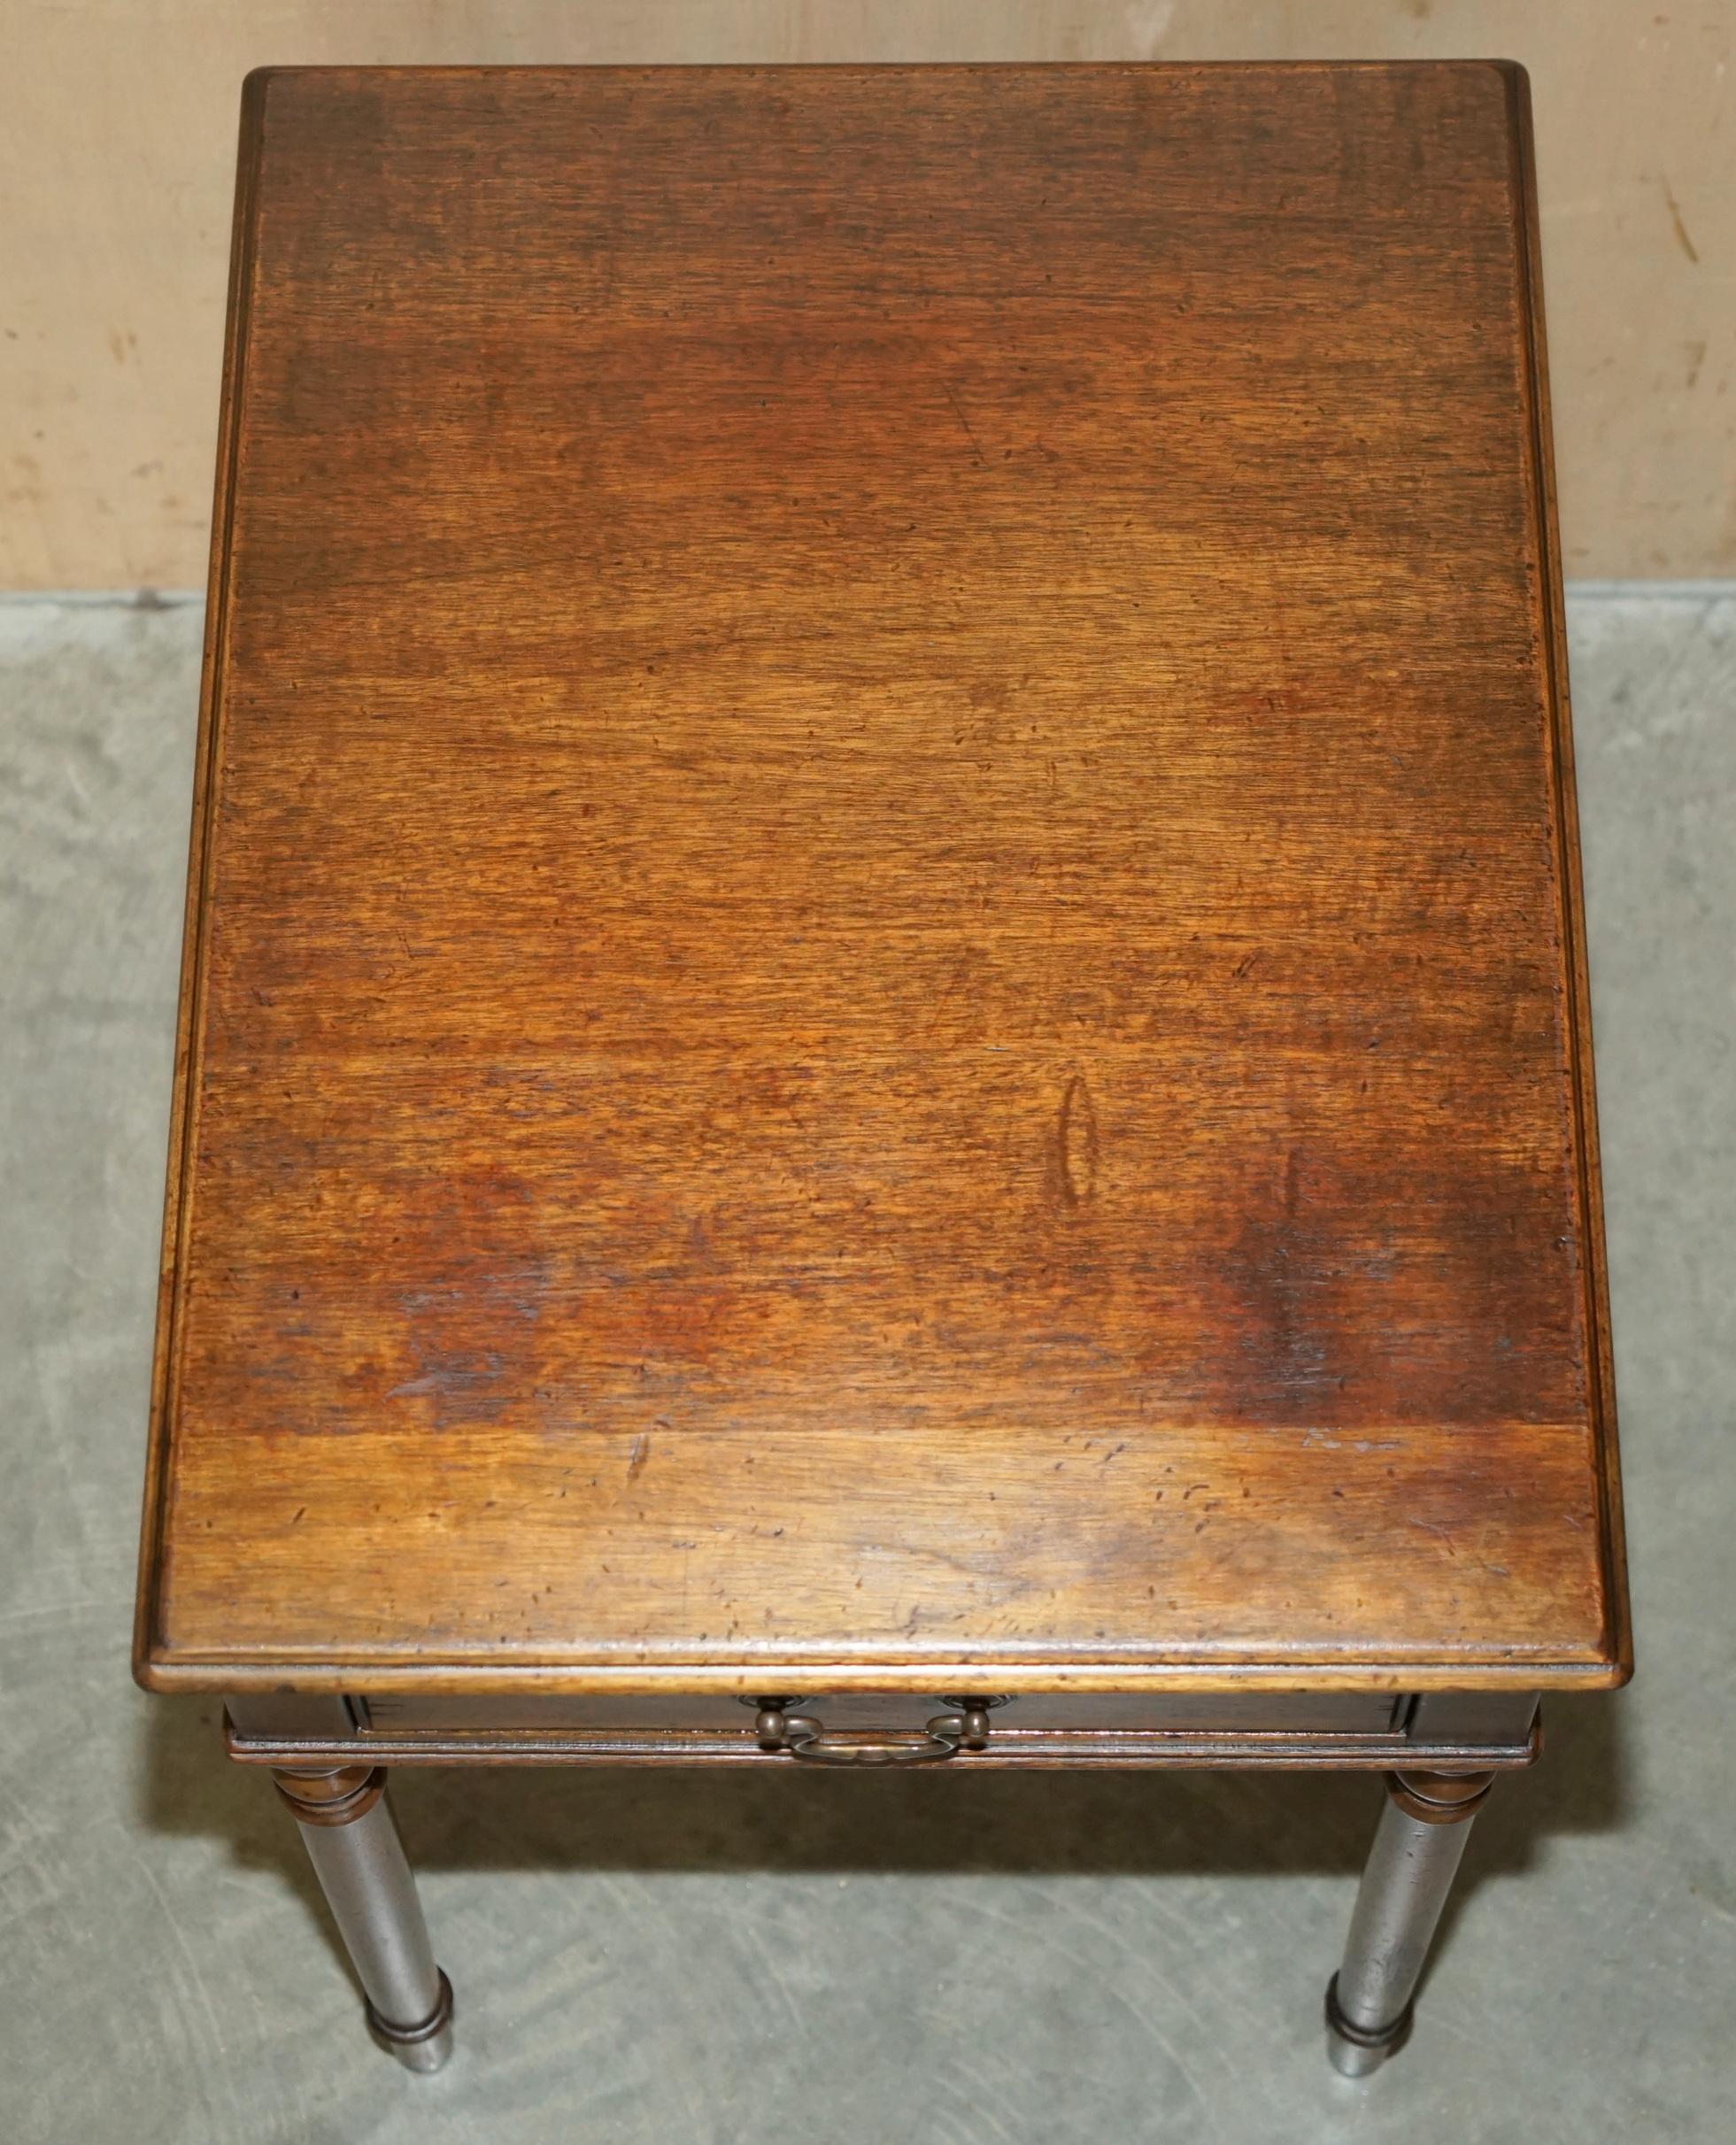 ENGLiSH COUNTRY HOUSE OAK CIRCA 1940'S SINGLE DRAWER SIDE OR OCCASIONAL TABLE For Sale 2